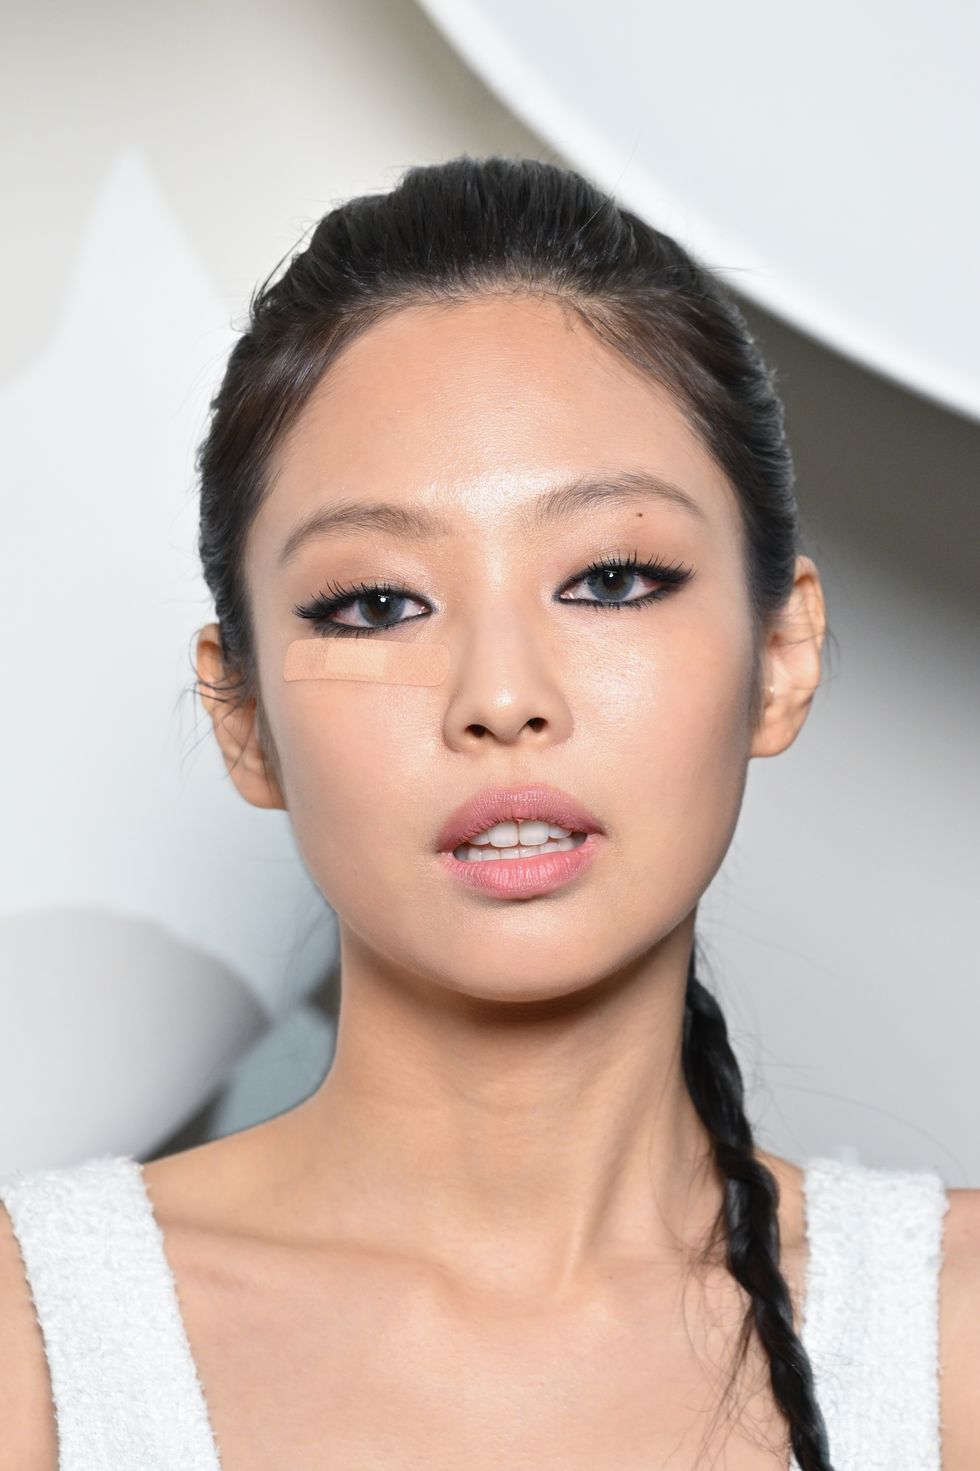 Why Blackpink's Jennie Wore a Band-Aid to Chanel's Paris Fashion